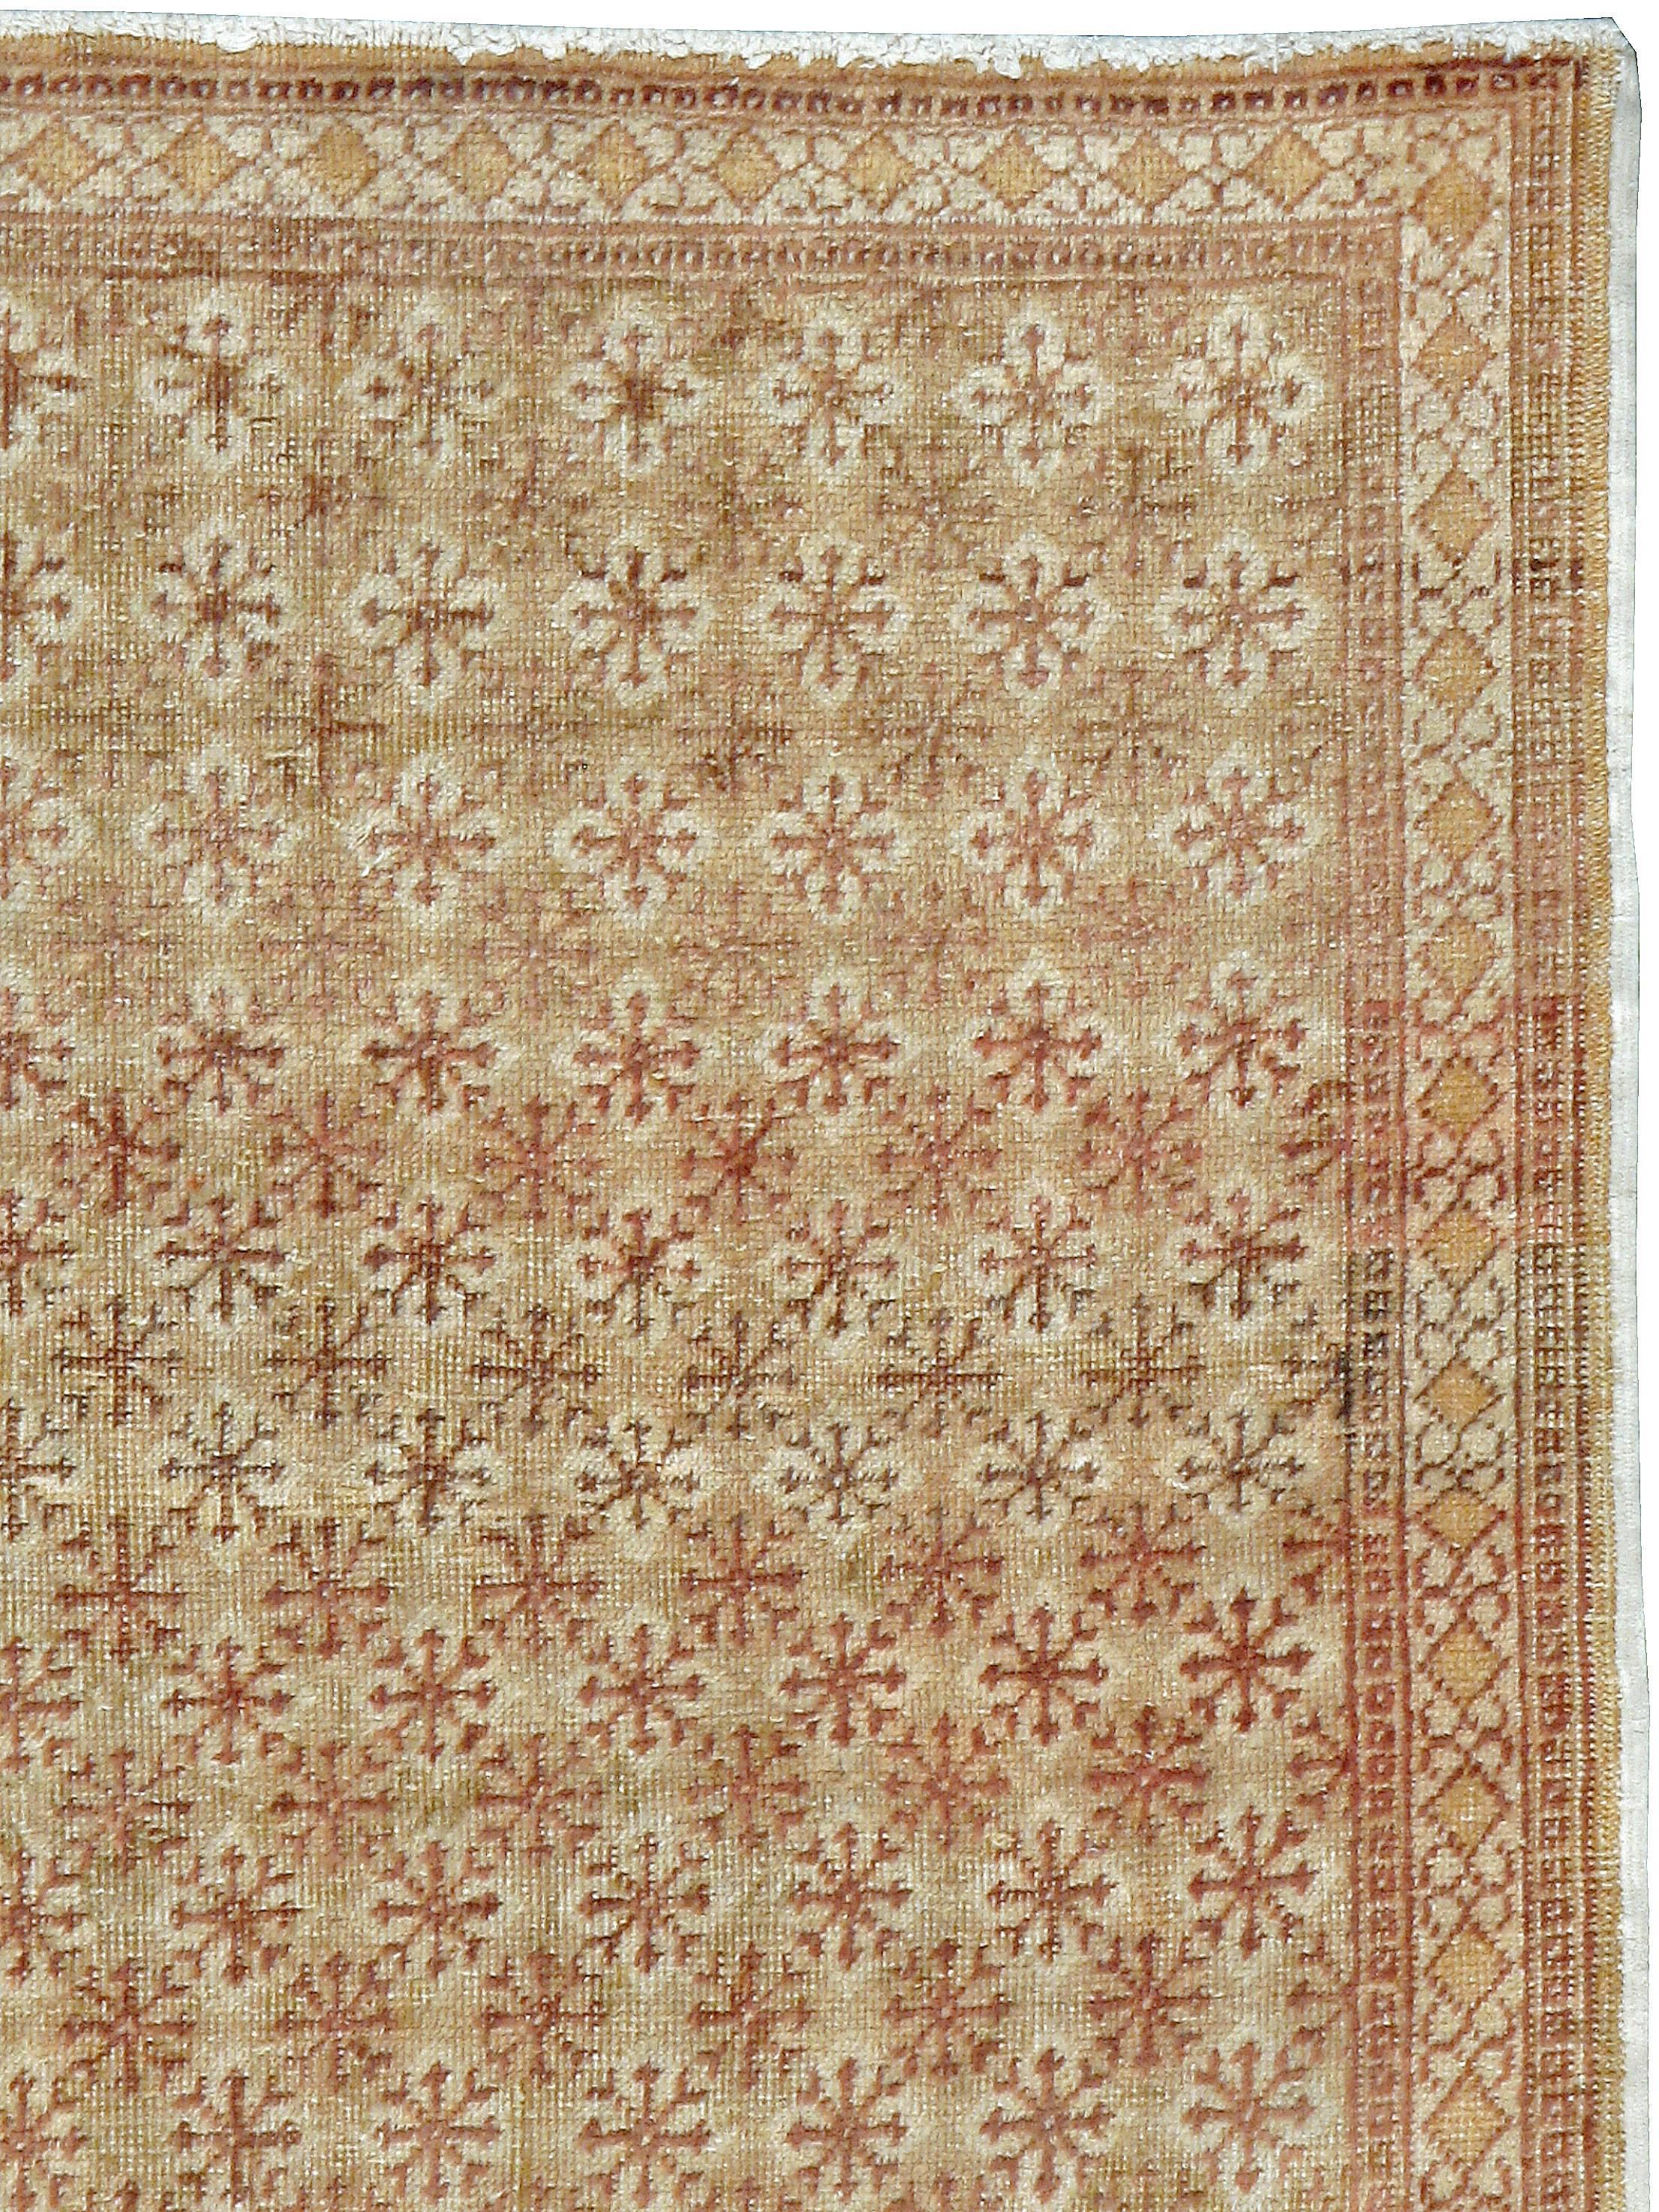 An antique Turkish Sivas carpet from the second quarter of the 20th century.